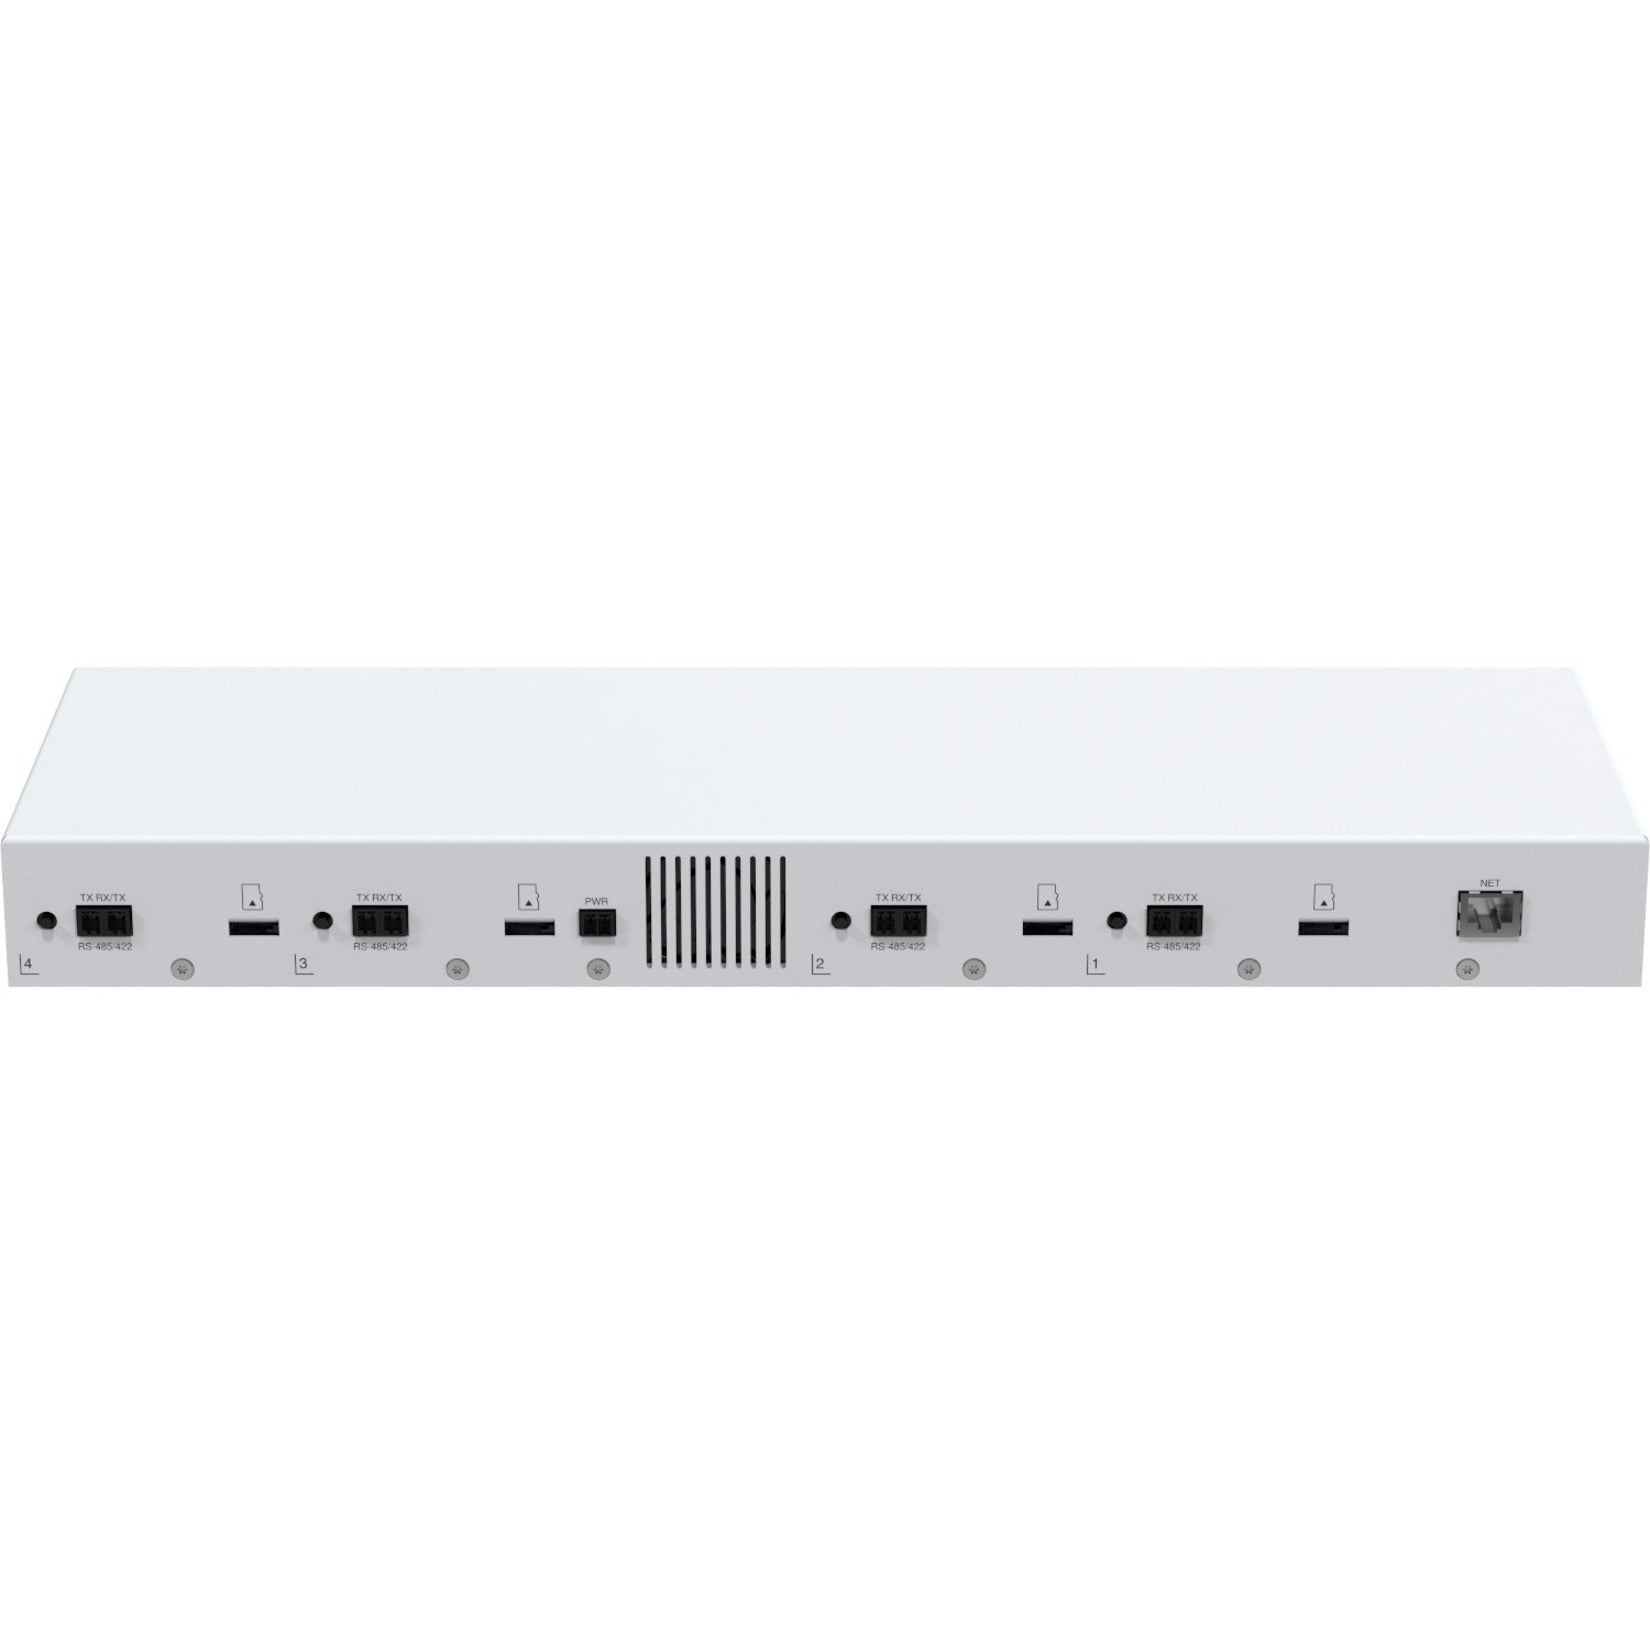 AXIS 02036-004 M7116 Video Encoder, TAA Compliant - High-Quality Video Surveillance Station